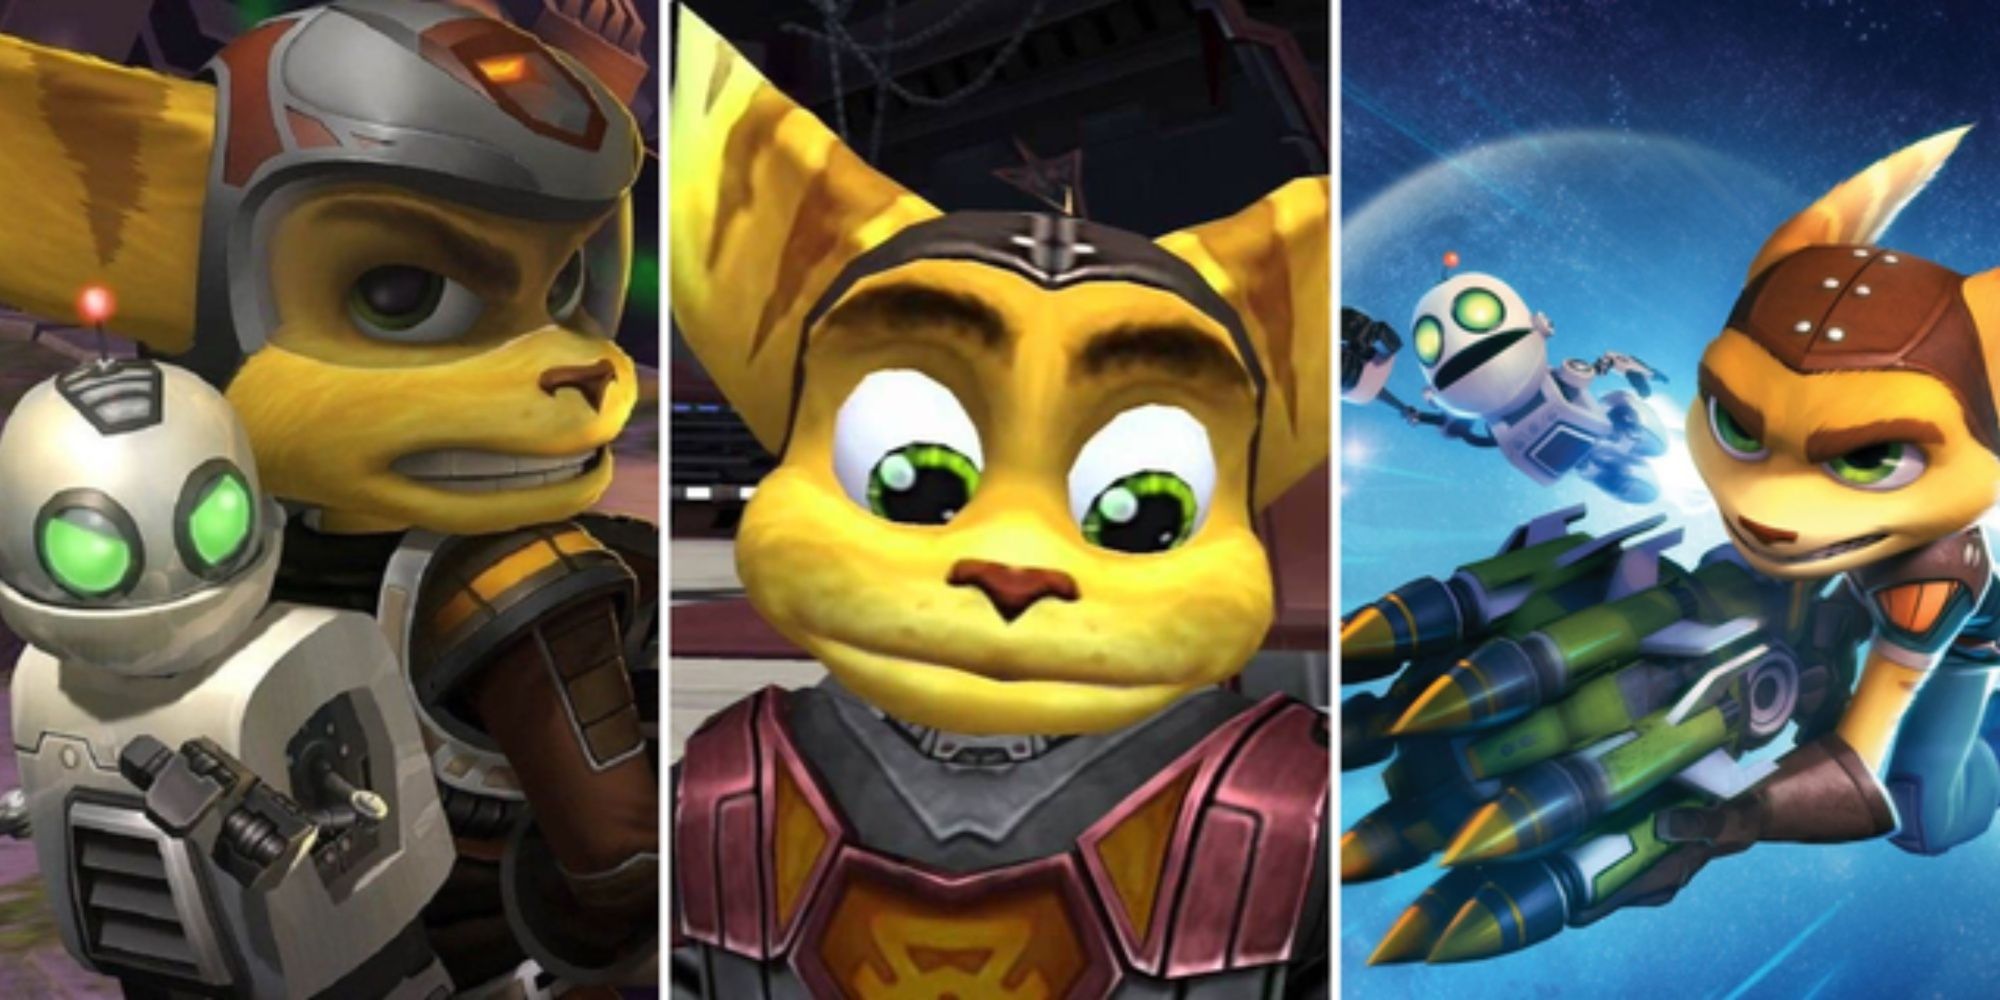 Ratchet & Clank from different games over the years side by side